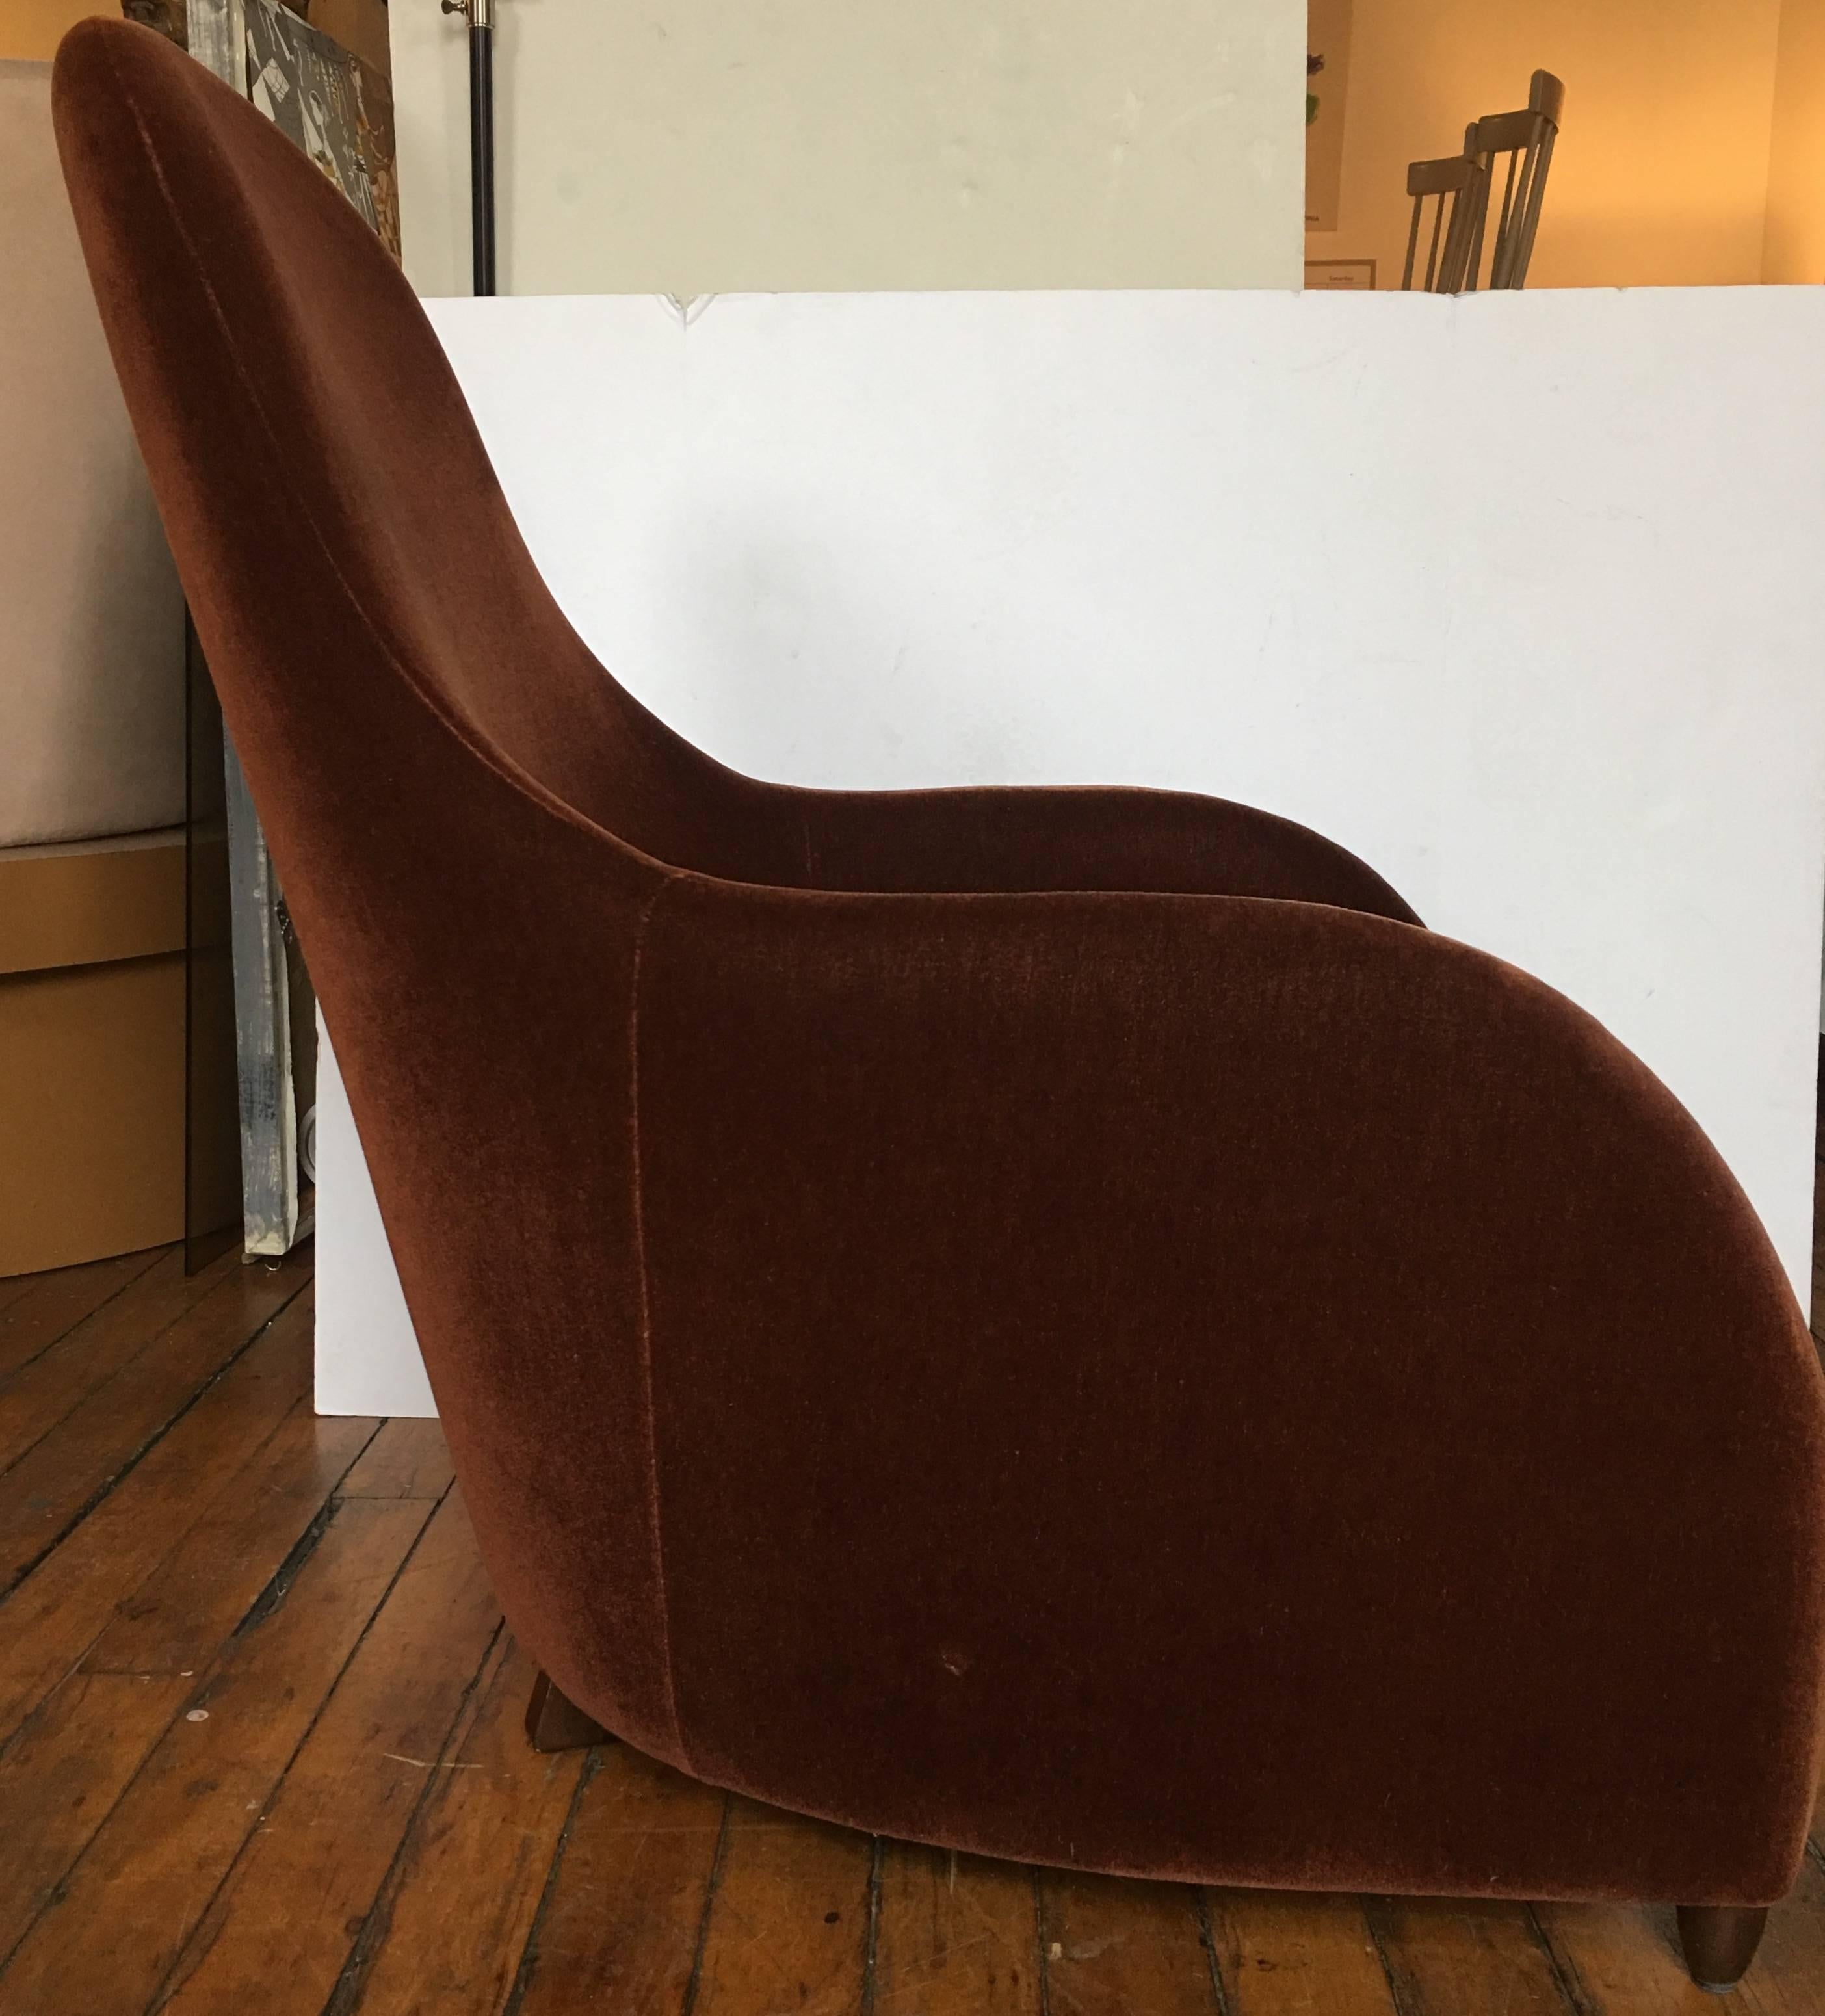 Classical sculptural modern lounge chair designed by Mitchell Pickard for Brueton Industries. Flowing and curved frame features original brown tone mohair upholstery. Original upholstery label, dated 2009.

Pair available. Please see other listings.